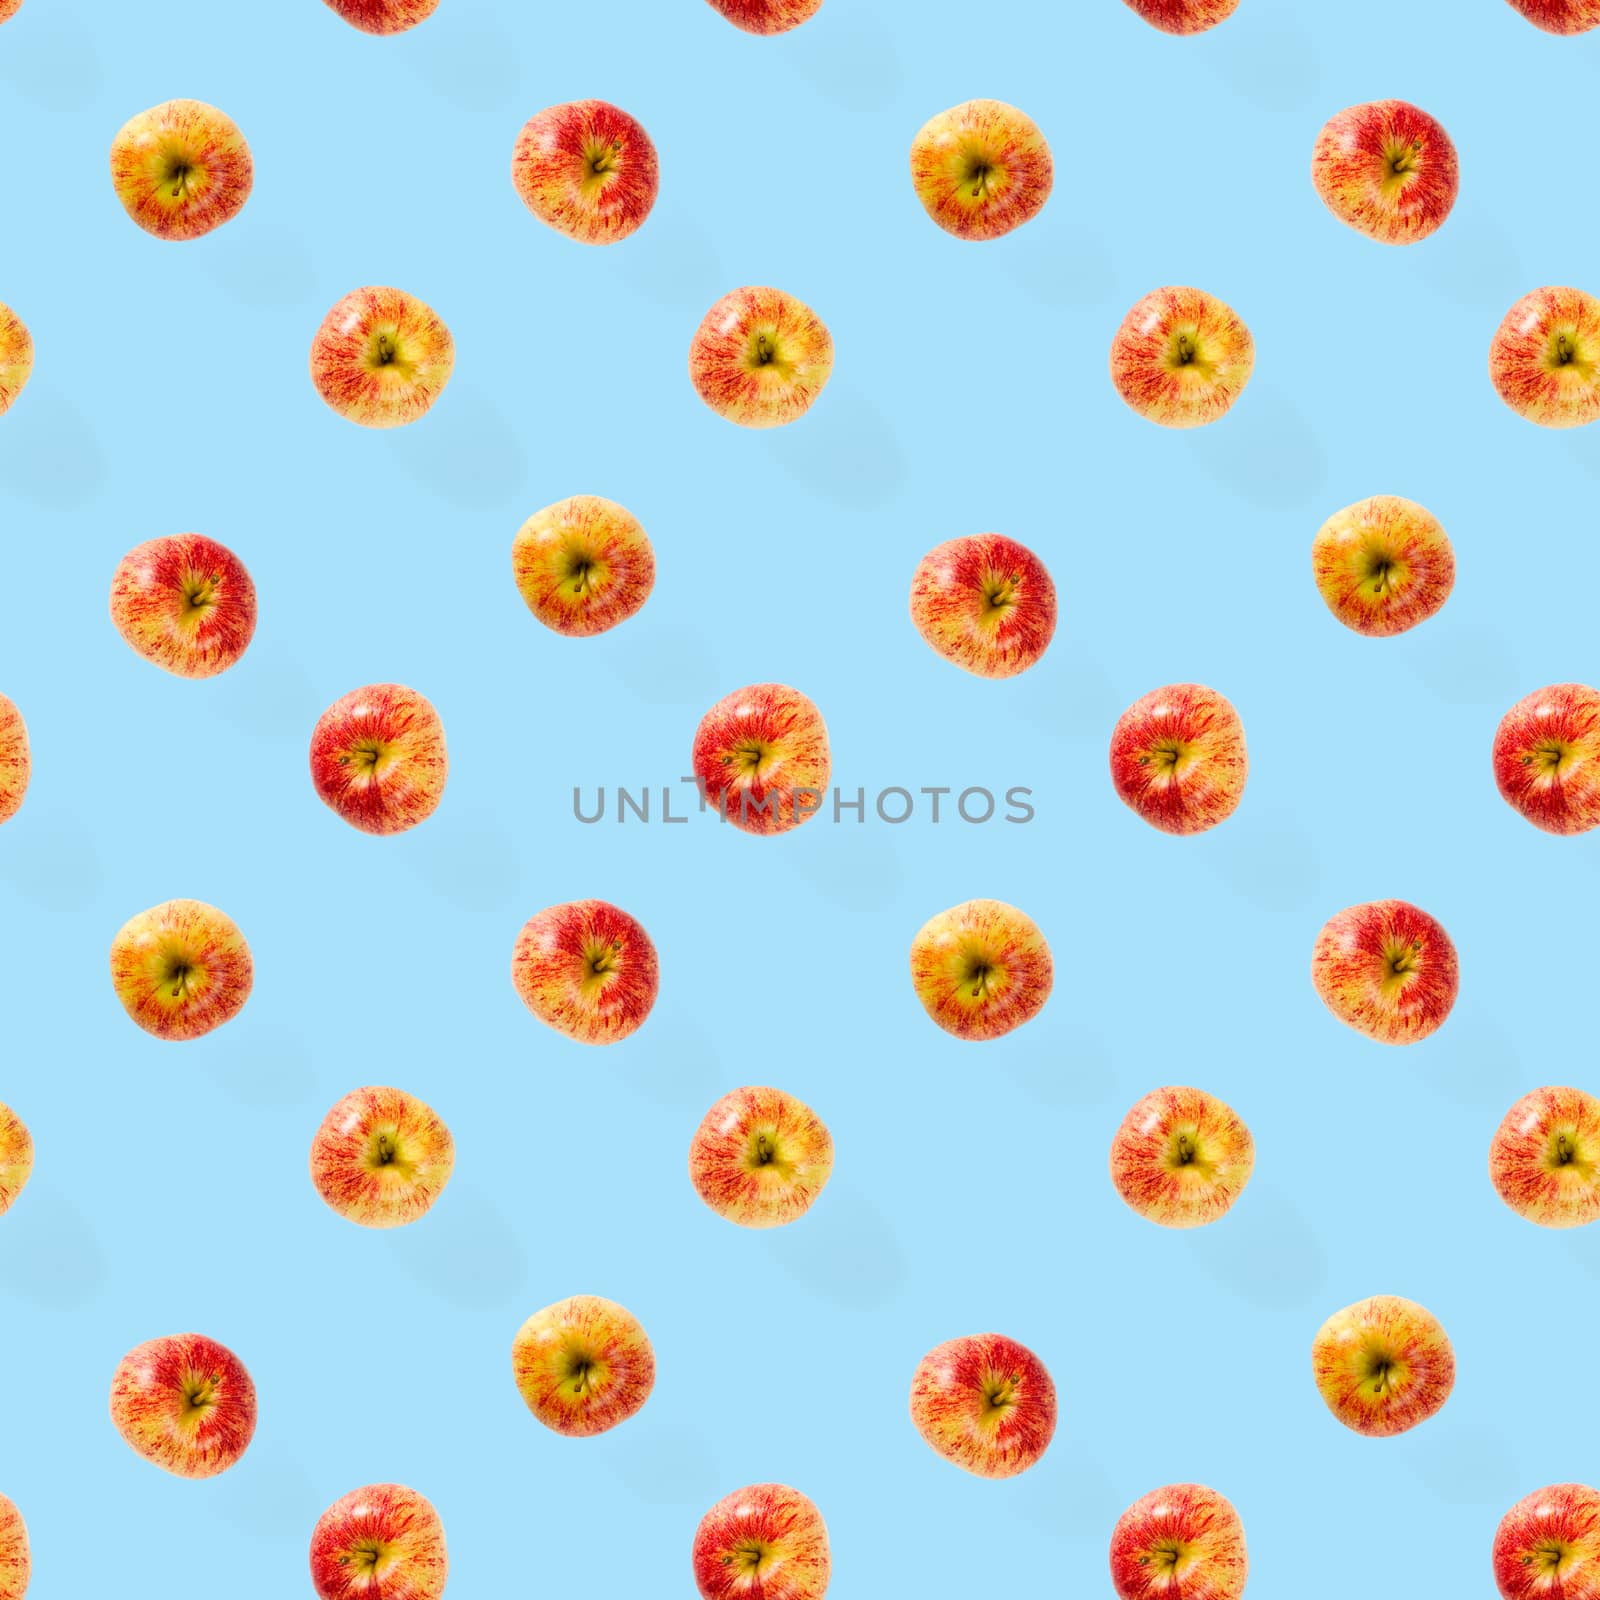 Seamless pattern with ripe apples. Apple seamless pattern on blue background. Tropical fruit abstract background.